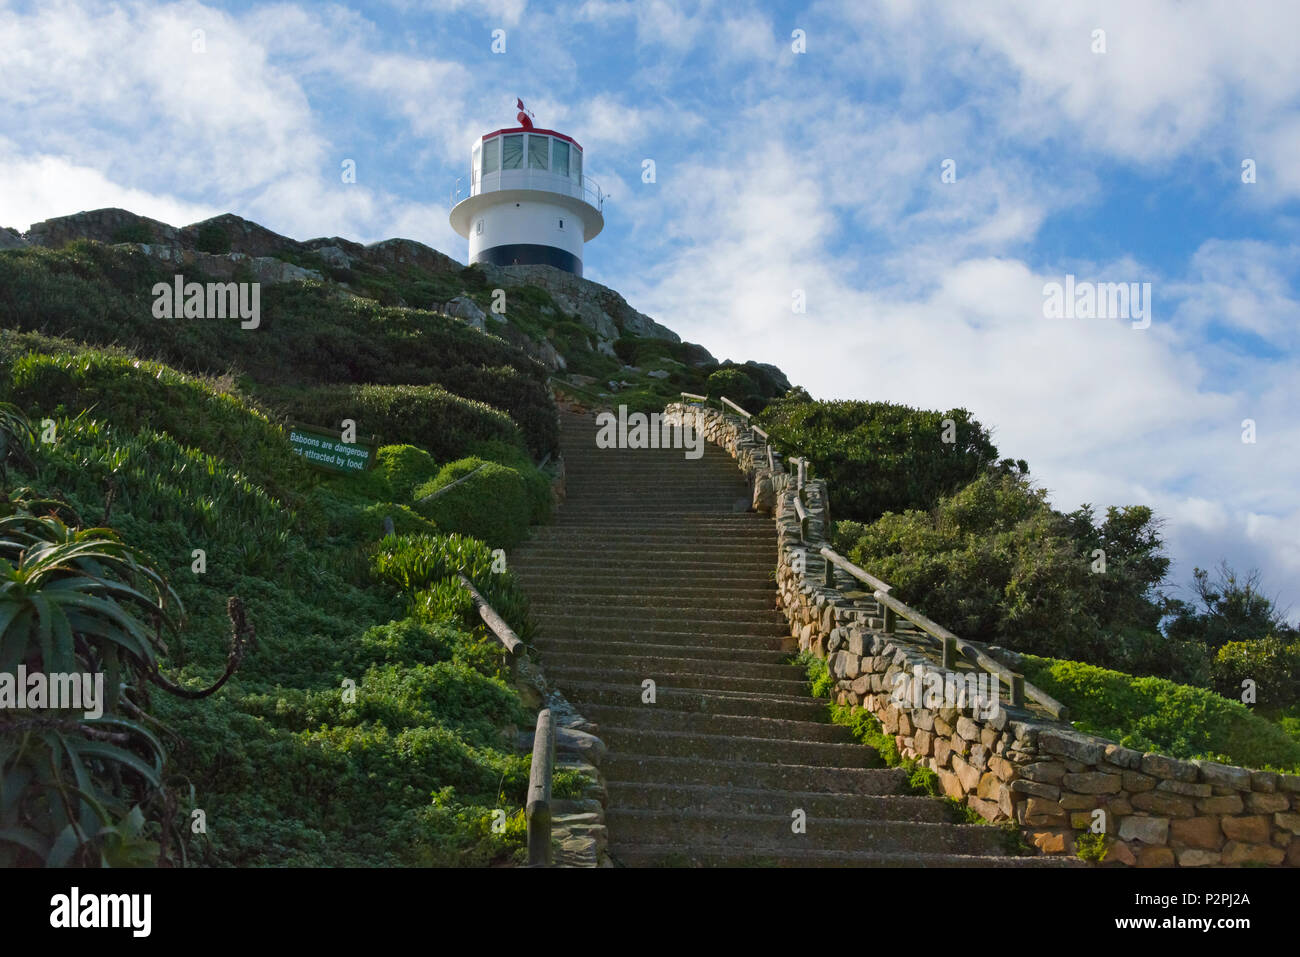 Lighthouse at Cape Point, Cape Peninsula, South Africa Stock Photo